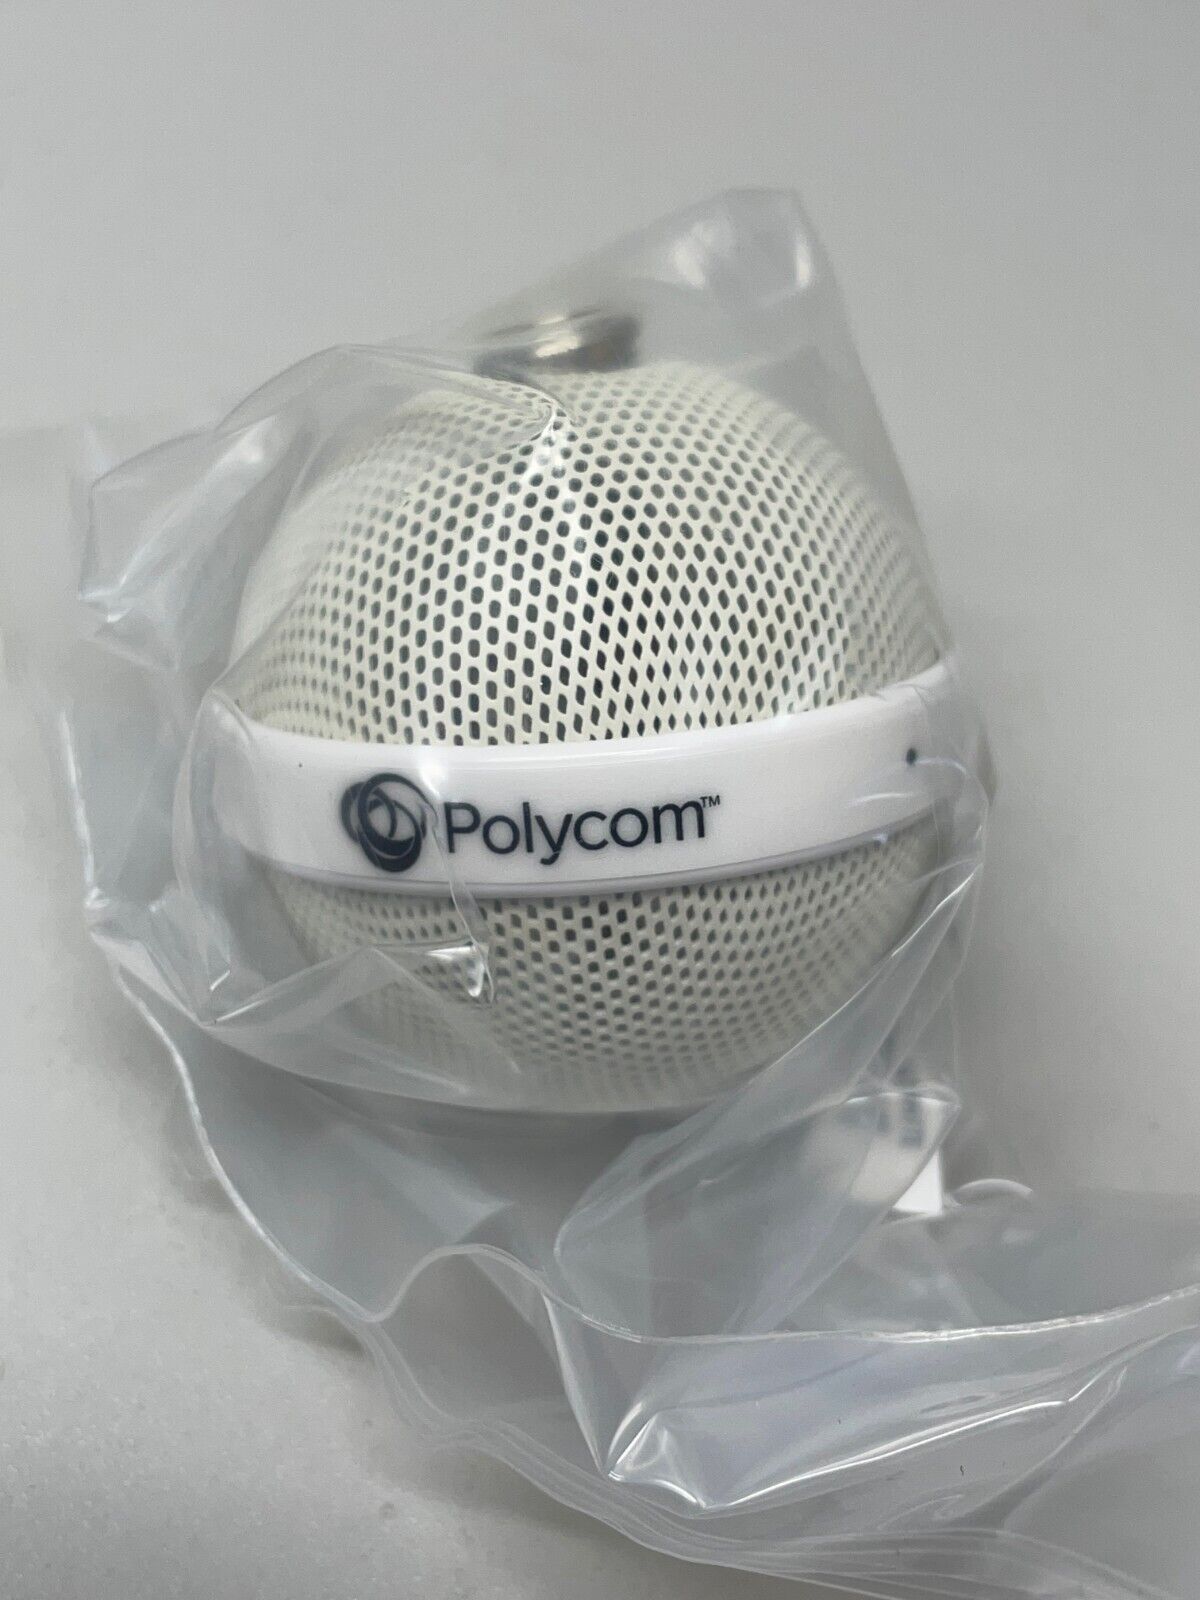 Polycom 2200-23810-002 White HDX Conferencing Ceiling Microphone NEW